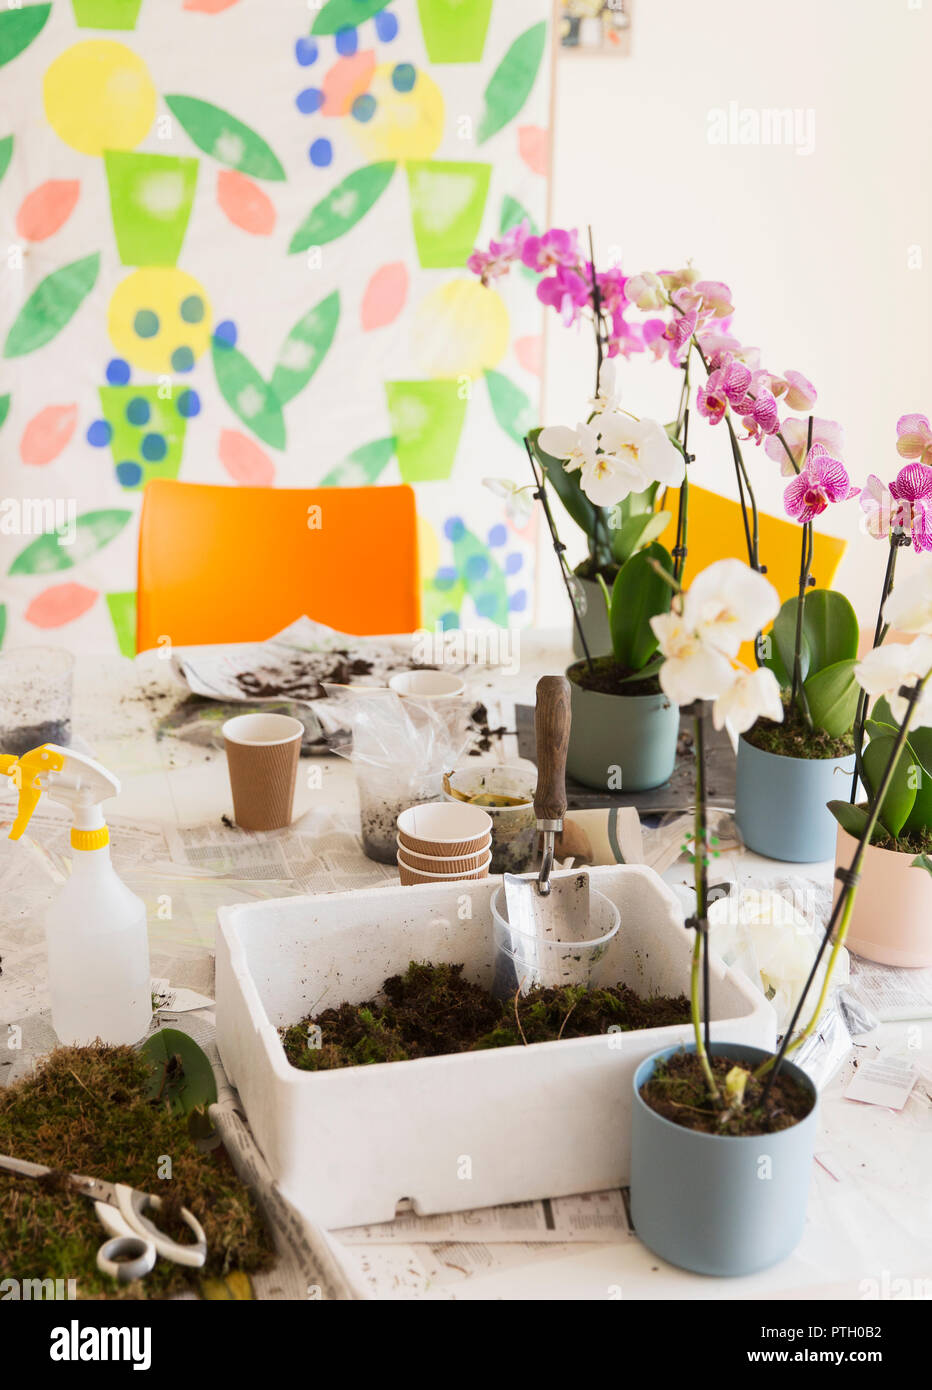 Orchids and potting soil on flower arranging class table Stock Photo